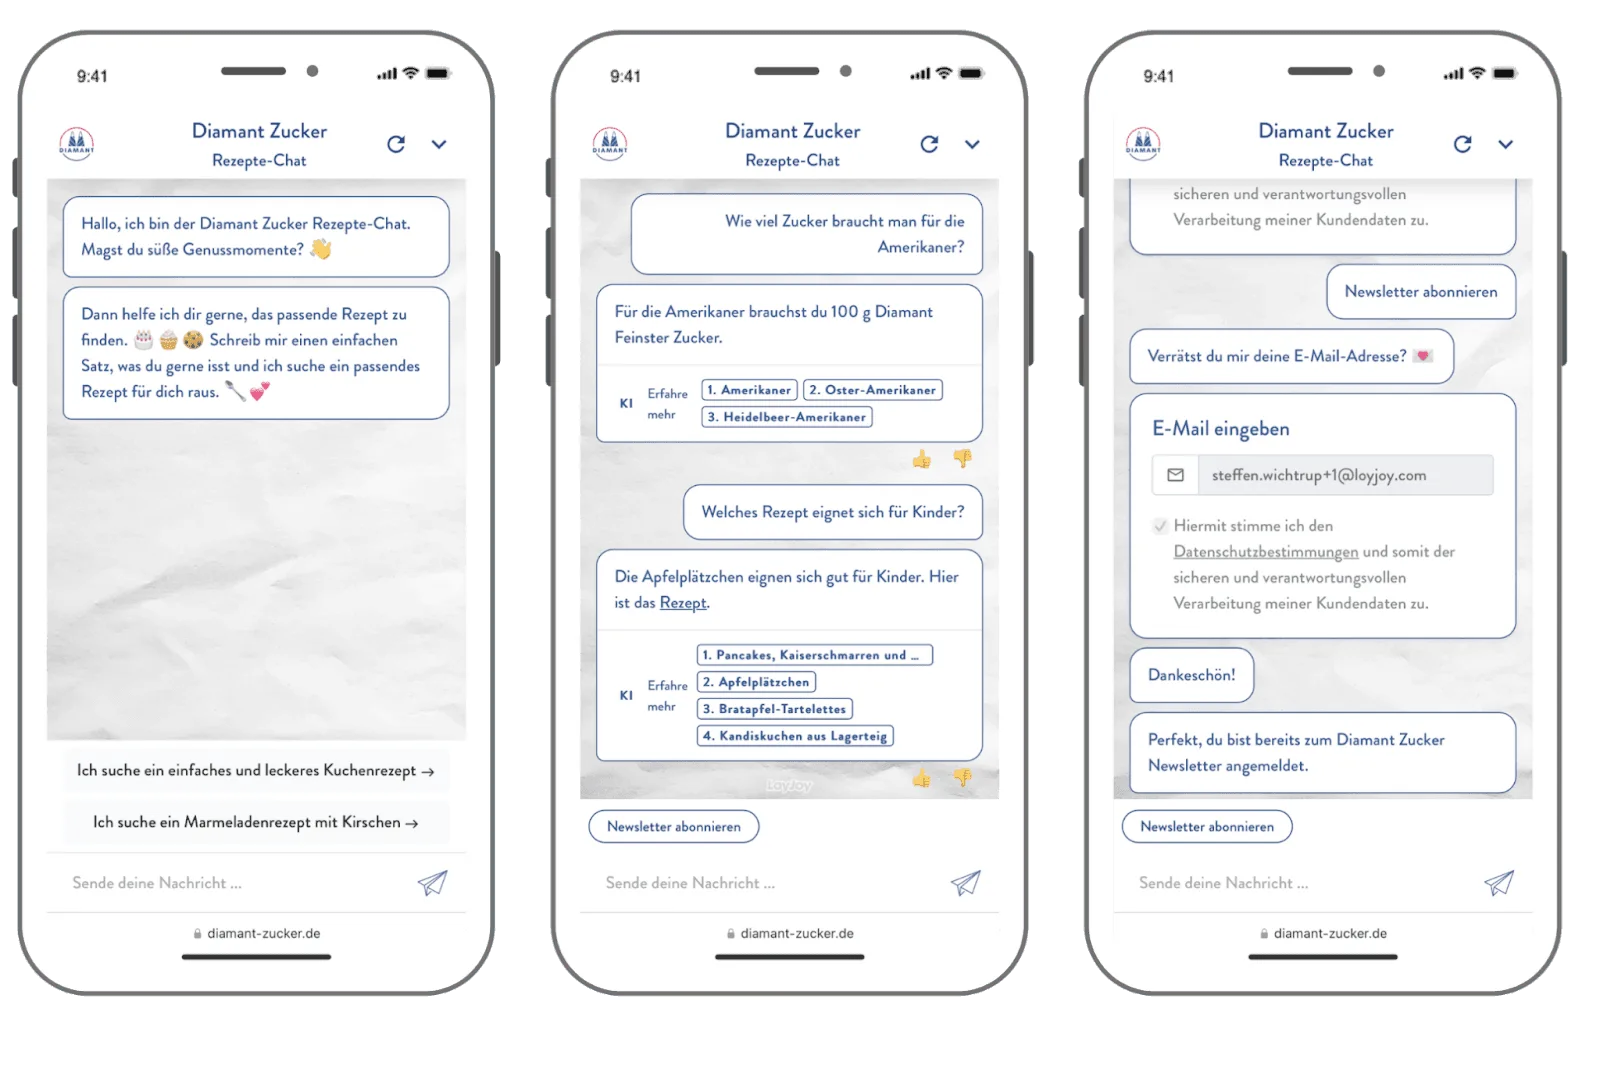 The Diamant Zucker chat experience is shown. Ask any question you have about a recipe or pick one of the two options. Search for new recipes and rate the results. Sign up for the Diamant newsletter.